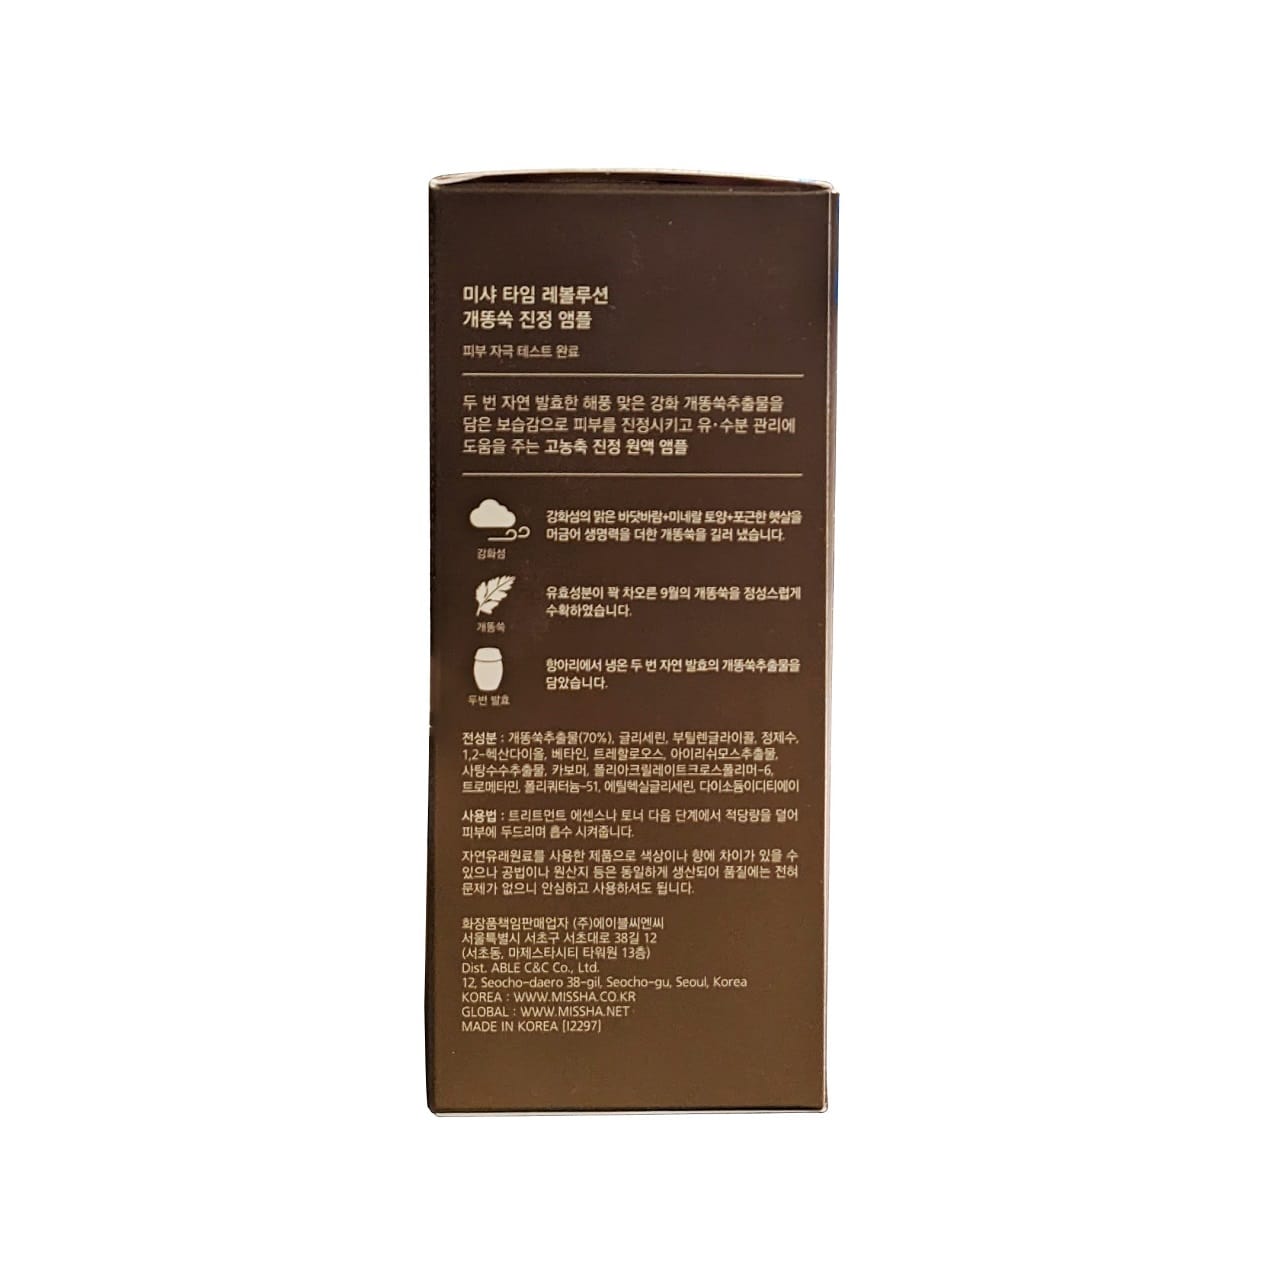 Ingredients, directions, and caution for MISSHA Time Revolution Artemisia Ampoule (50 mL) in Korean